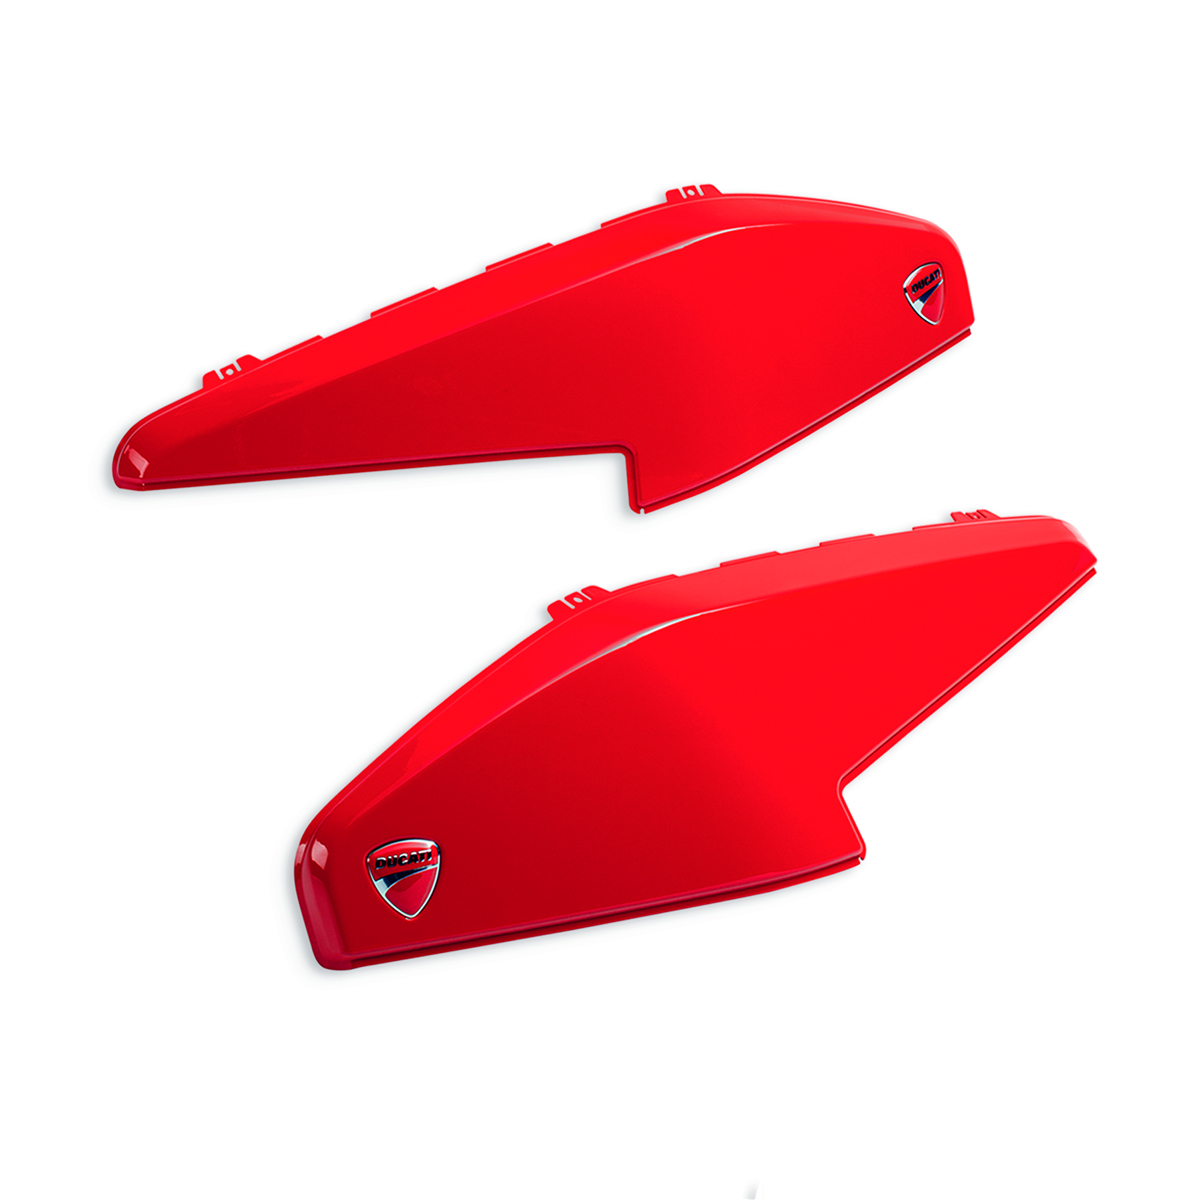 Ducati Set of covers for rigid side panniers.